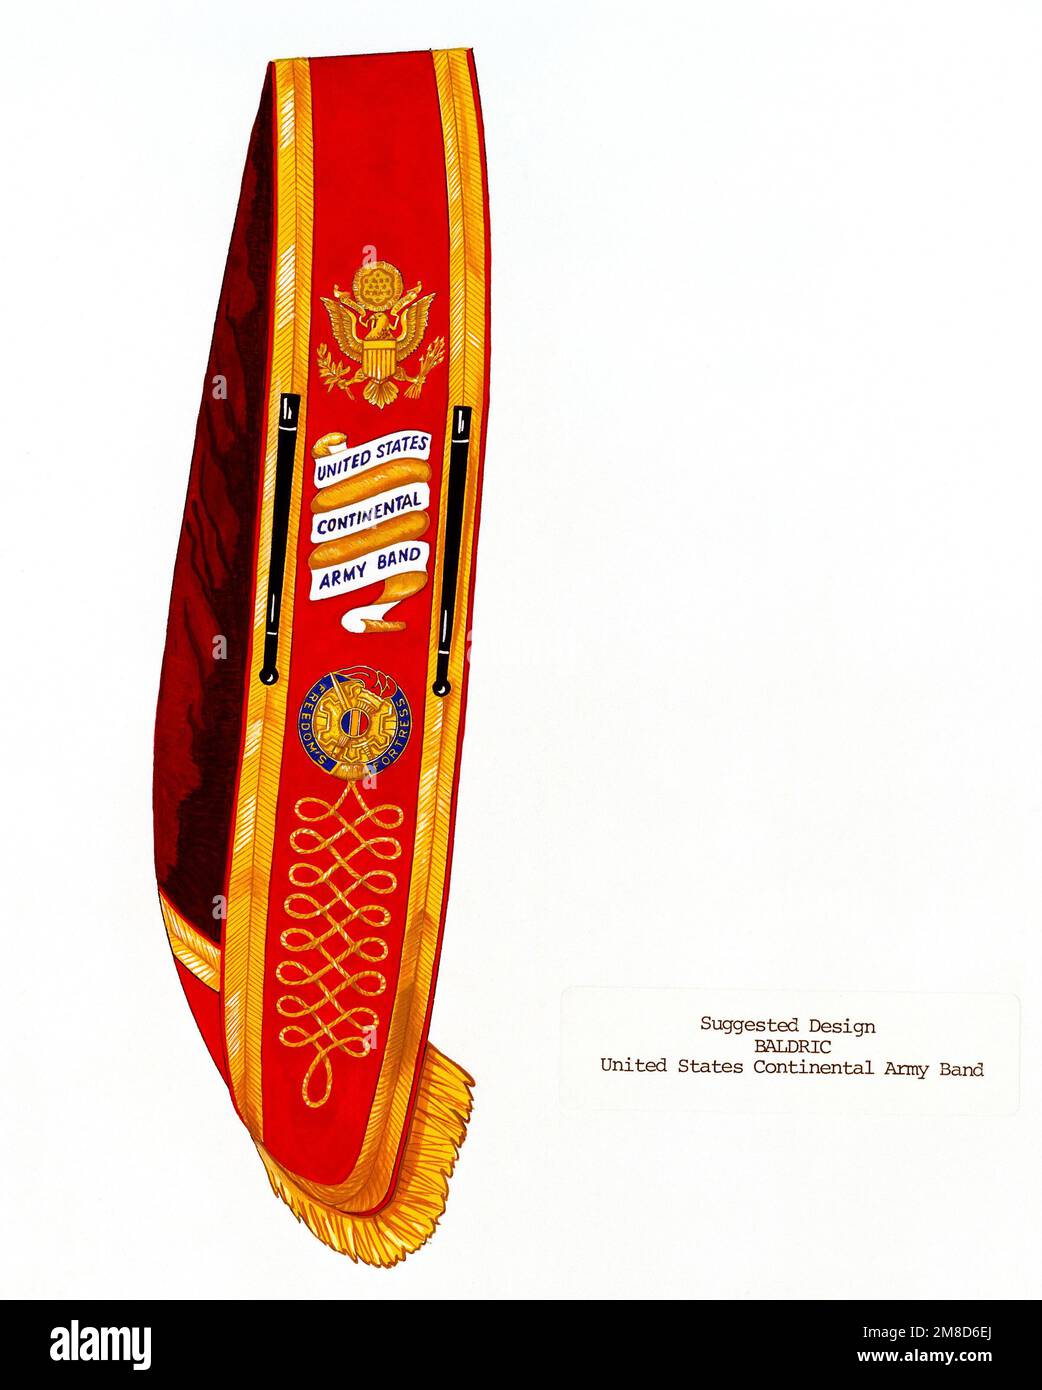 Heraldic Band Regalia: Baldric, United States Continental Army Band. Country: Unknown Stock Photo